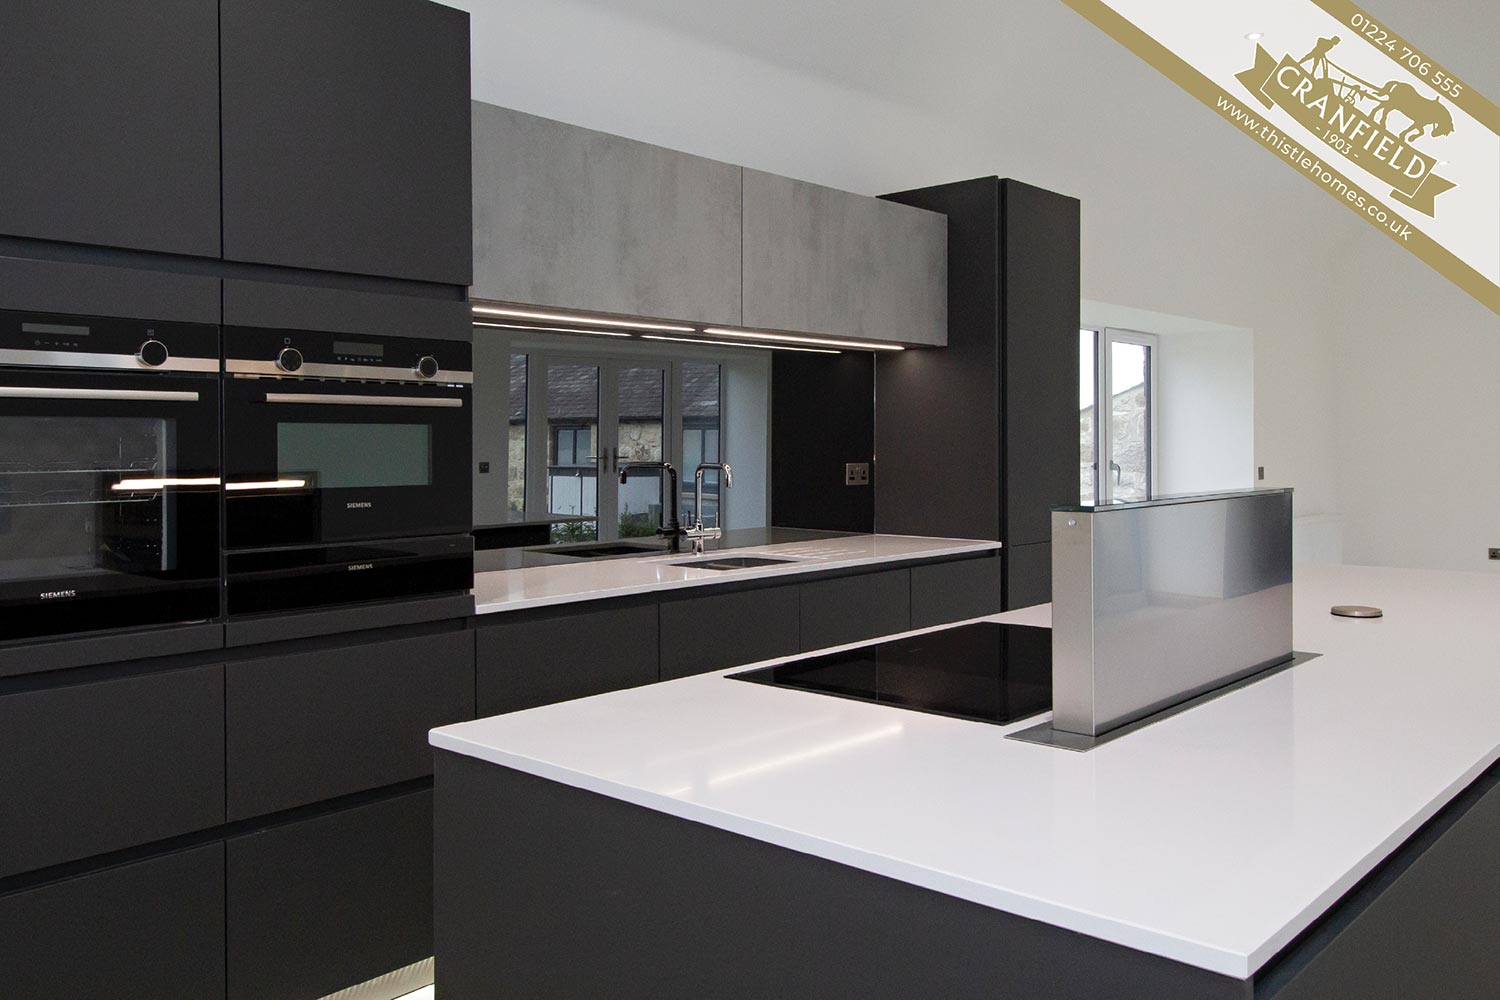 Cranfield by Thistle Homes Aberdeen: Plot 2 Fitted Kitchen with Integrated Siemens Appliances